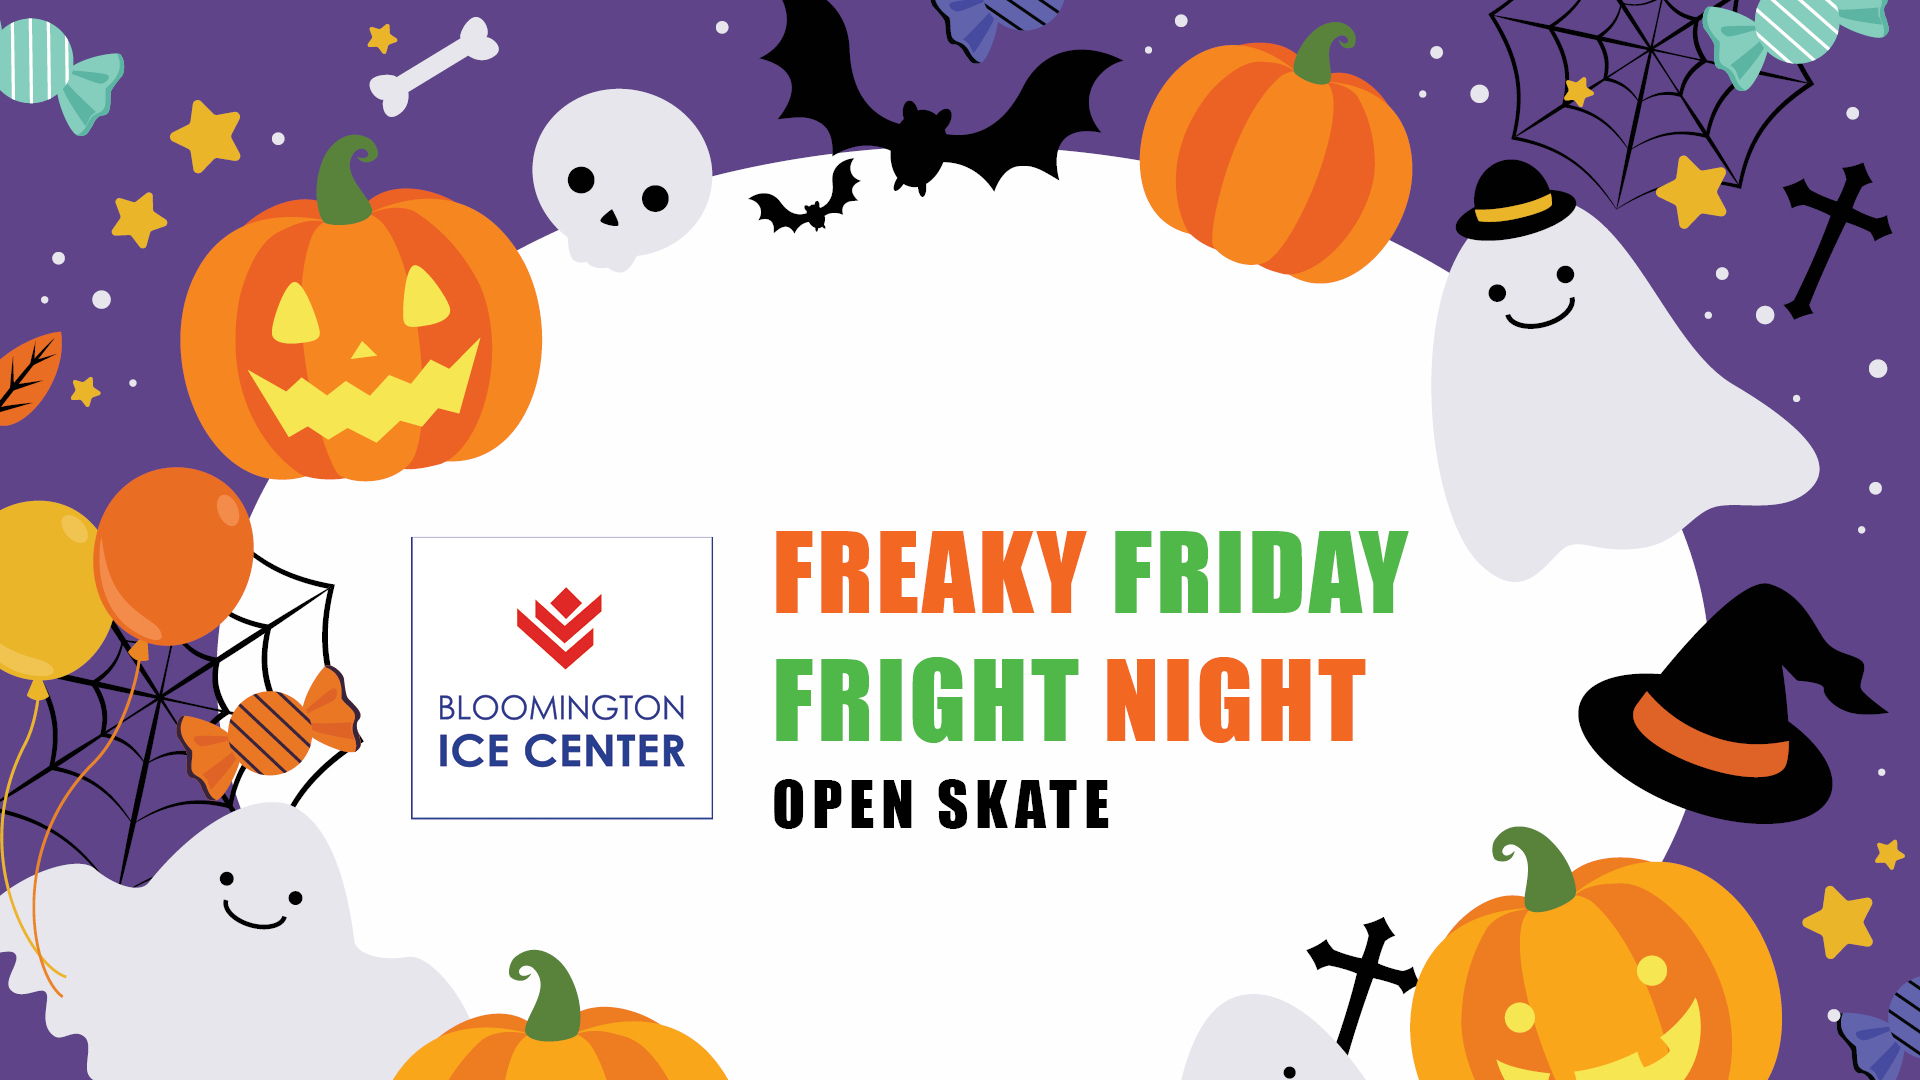 Freaky Friday Fright Night Open Skate at the Bloomington Ice Center